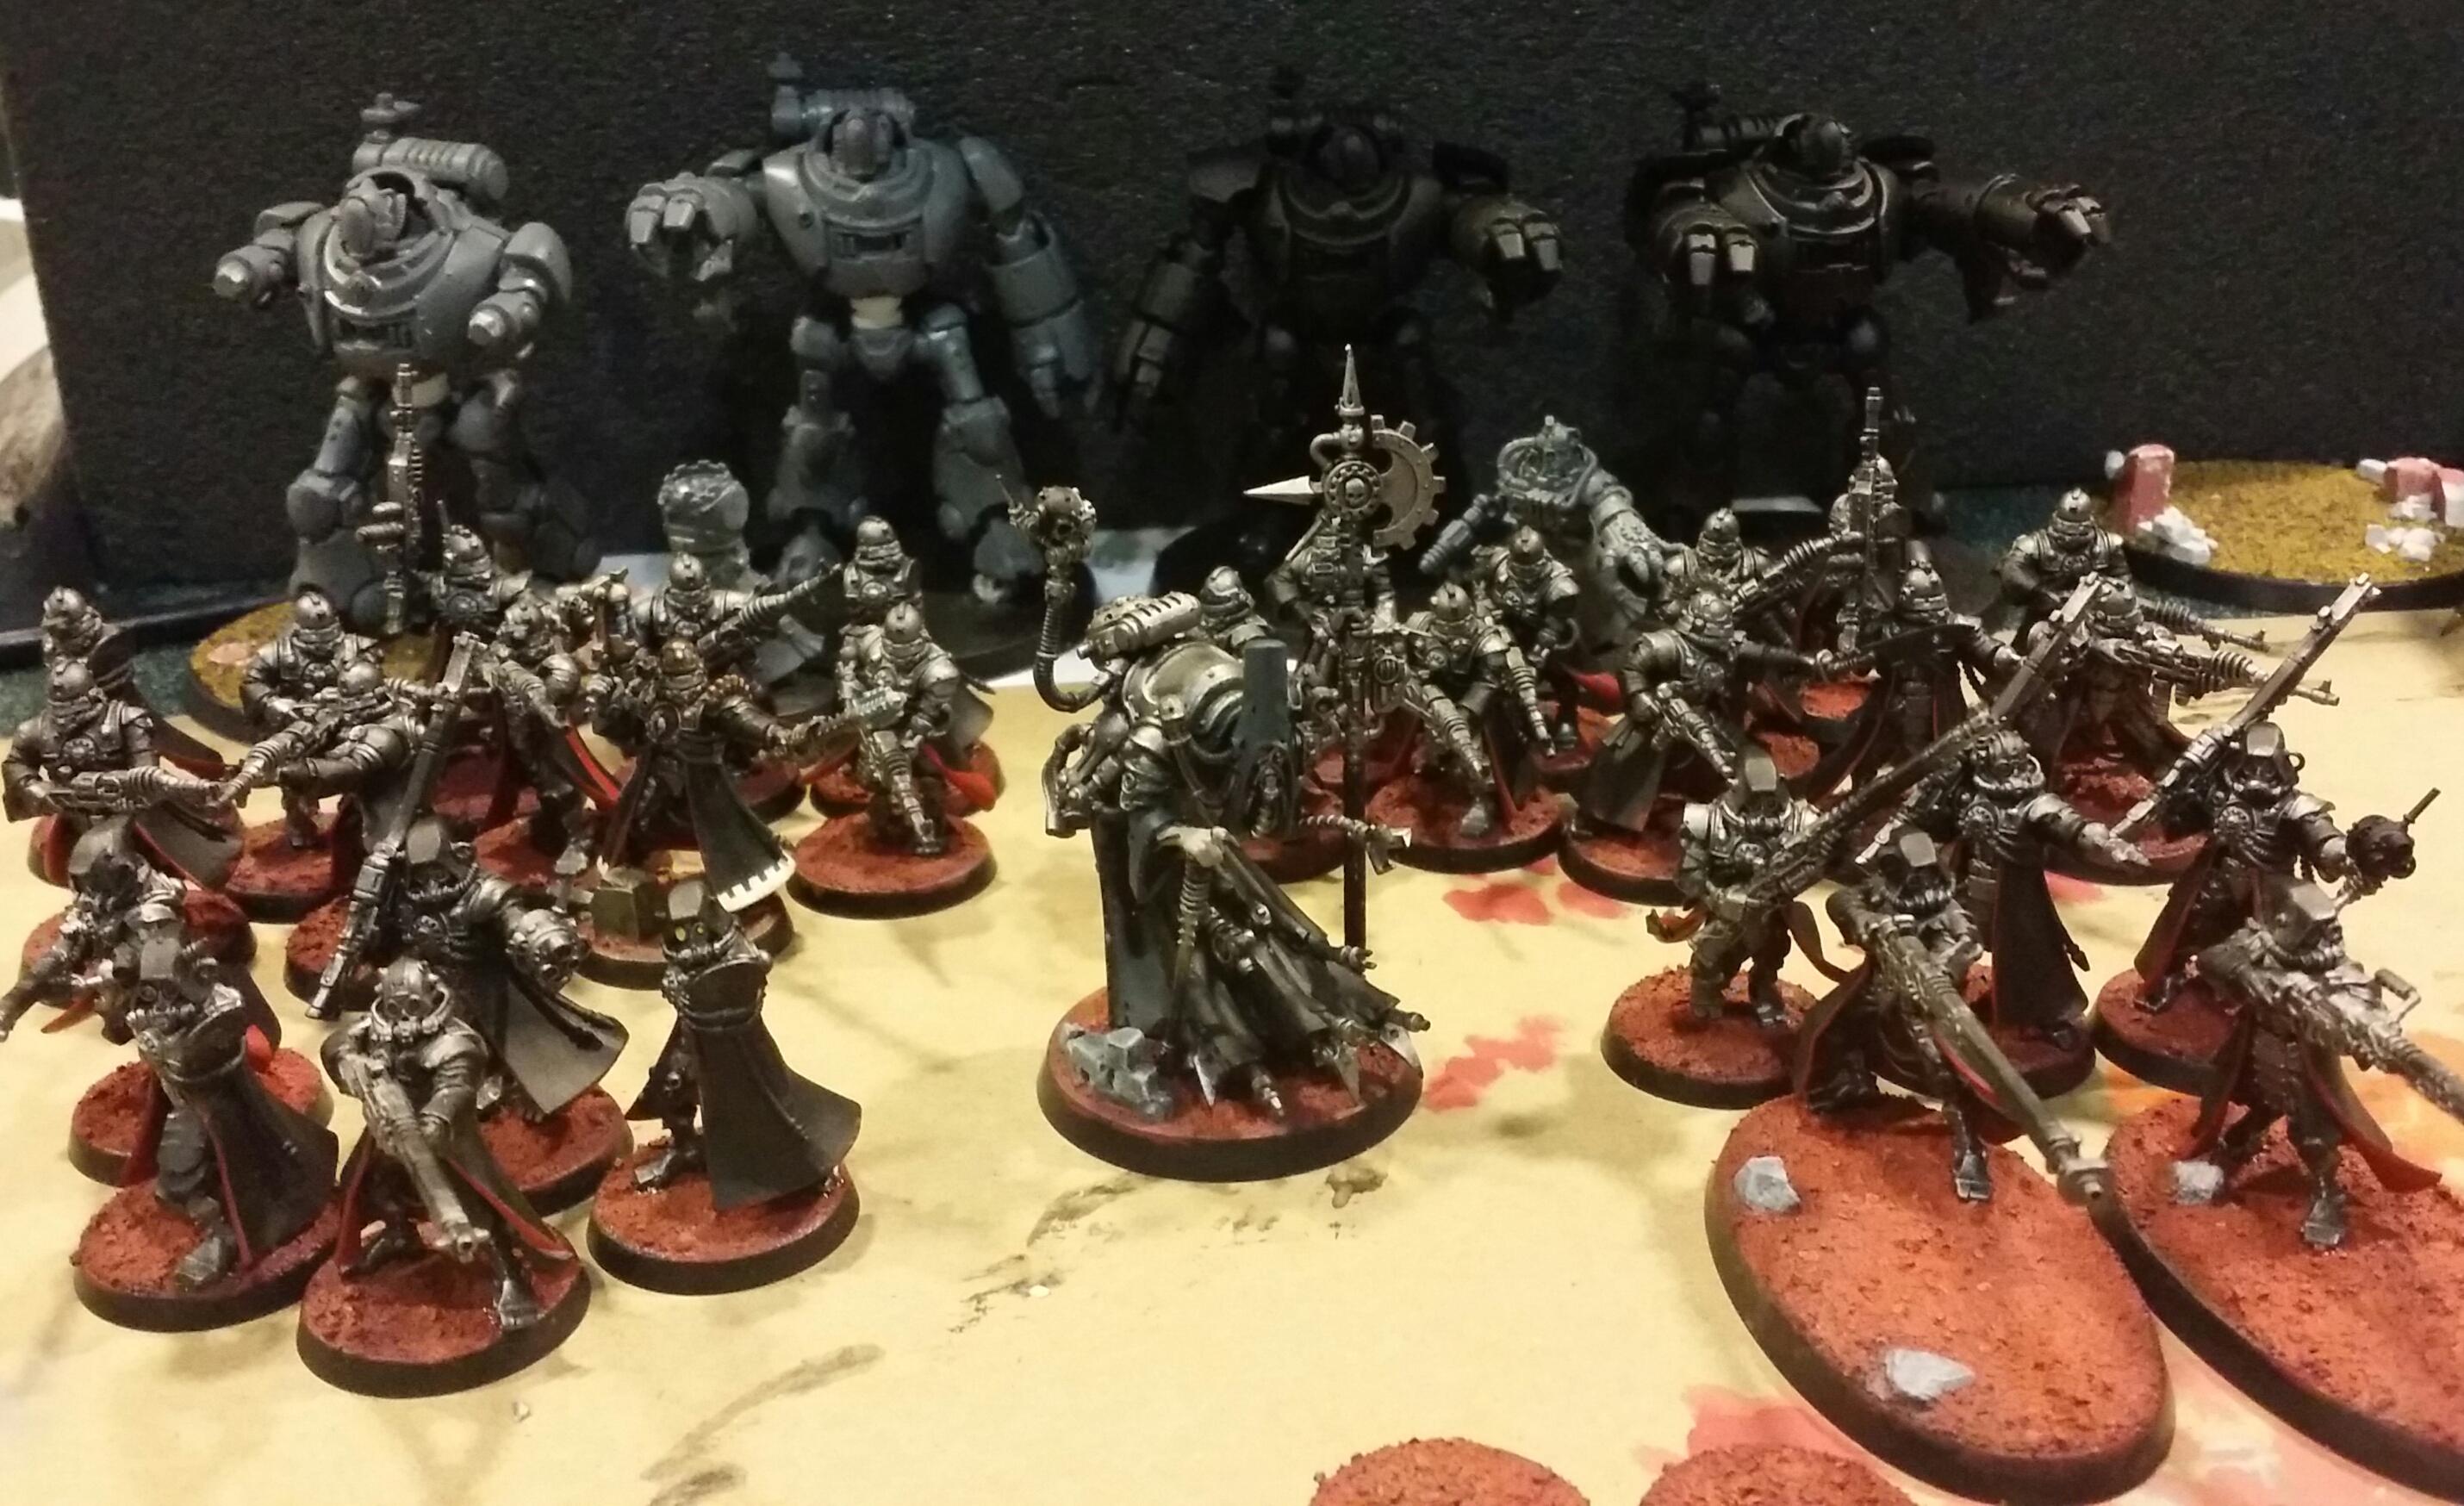 My cohort cybernetica flanked by skitarii